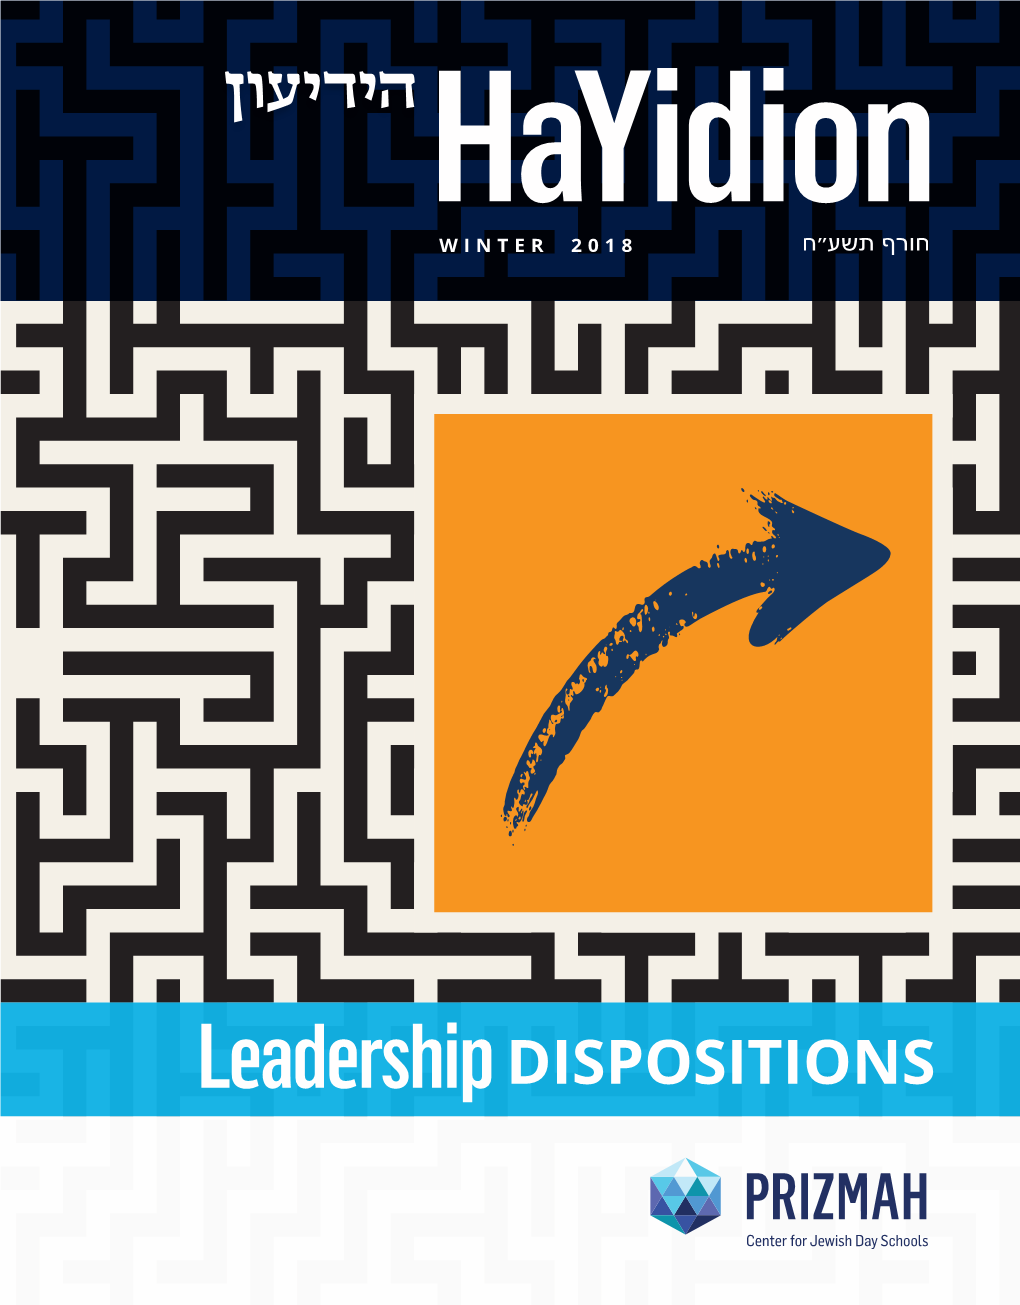 Leadershipdispositions